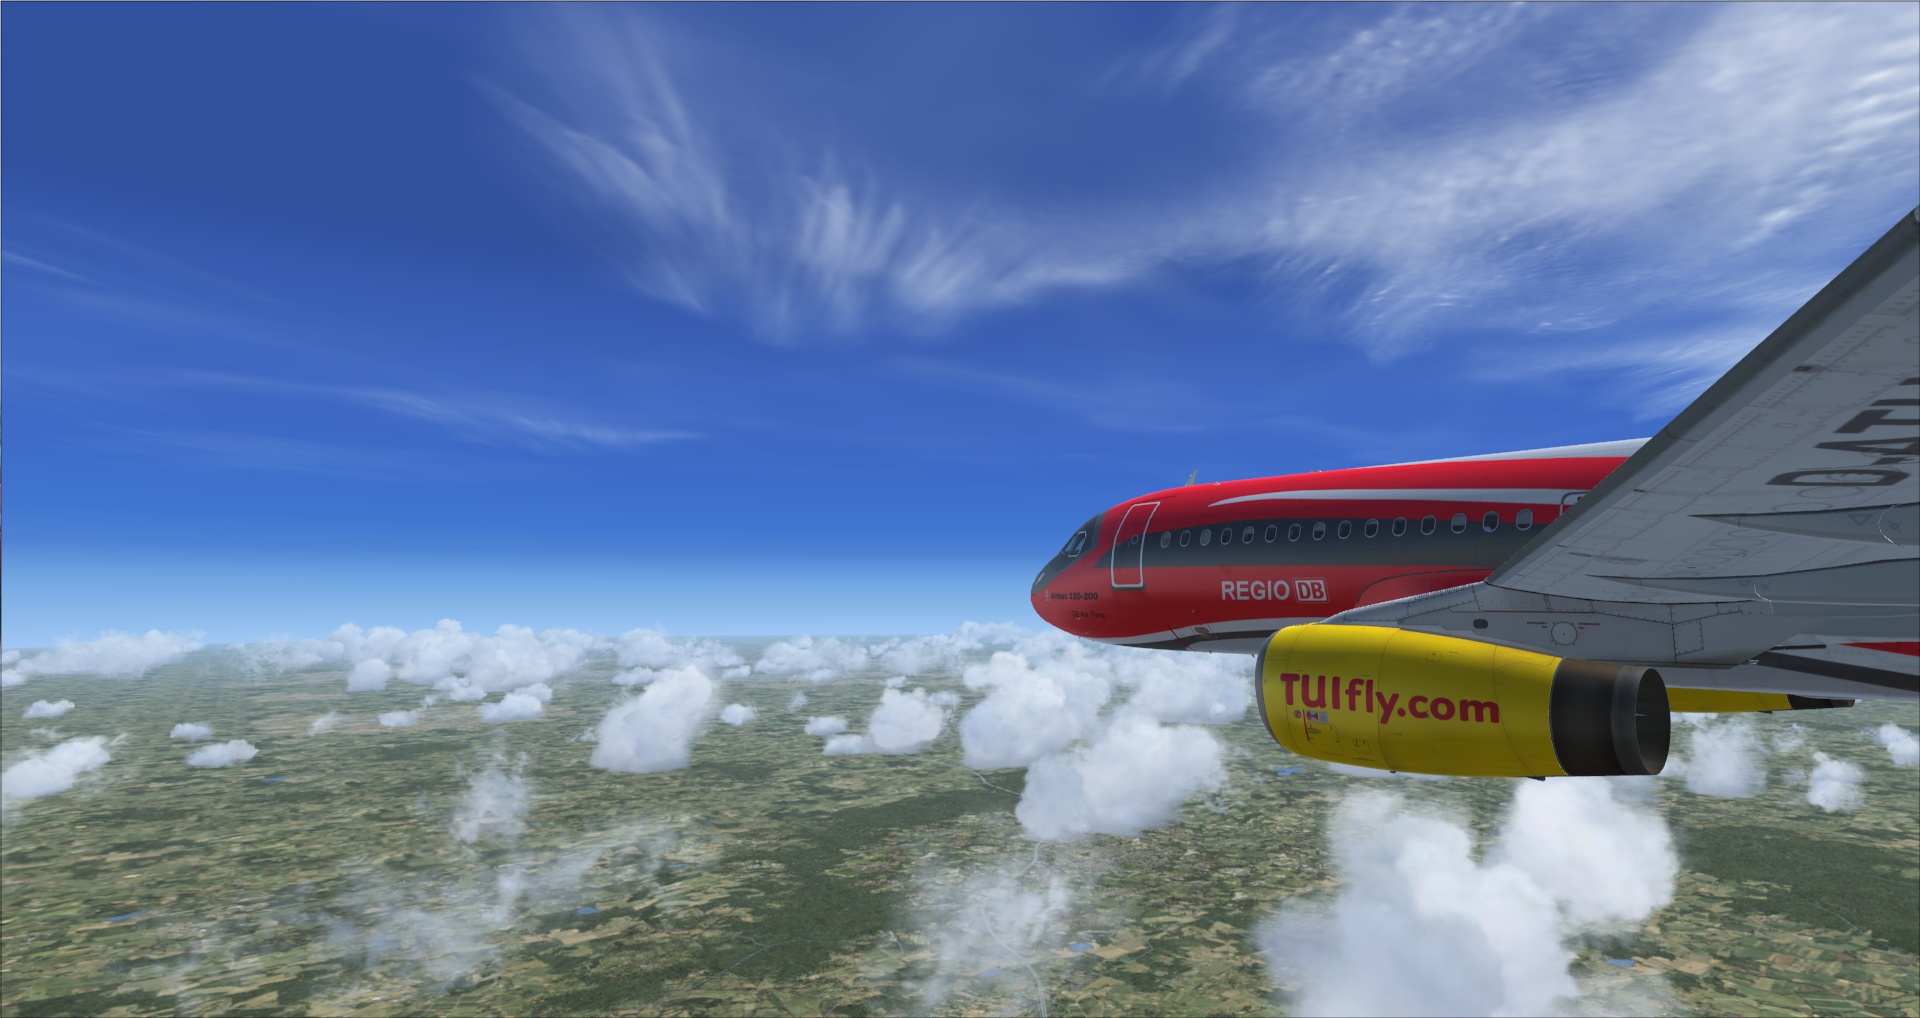 More information about "Tuifly DB AirTwo fictional A320 IAE D-ATUC"